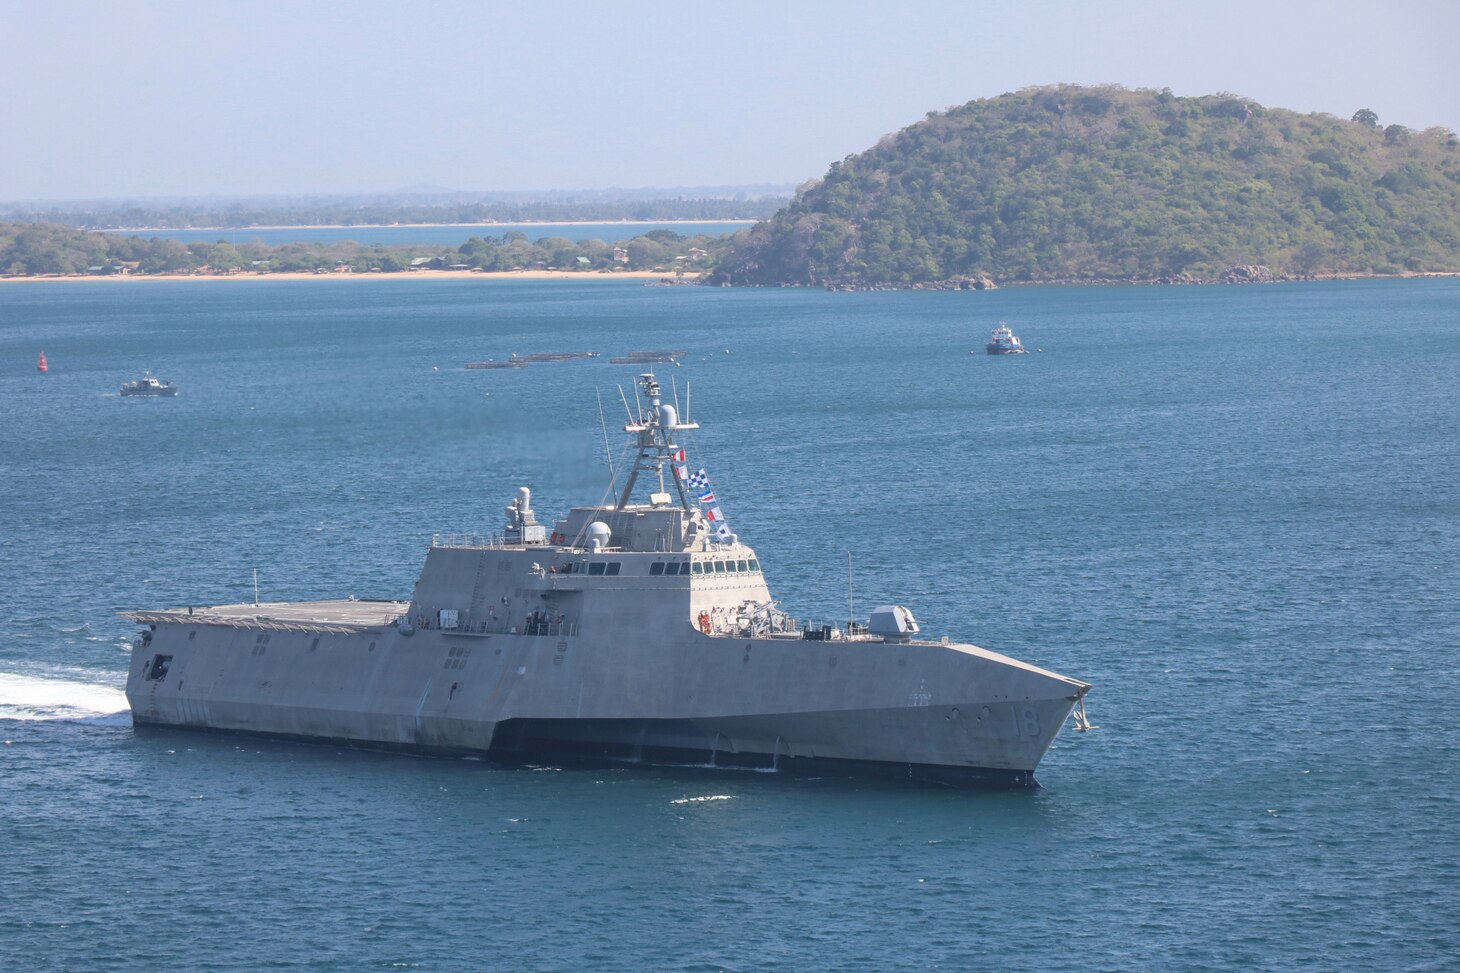 USS Charleston (LCS 18) arrives in Trincomalee, Sri Lanka, for a contactless port visit ahead of Cooperation Afloat and Readiness at Sea Training (CARAT) Sri Lanka.